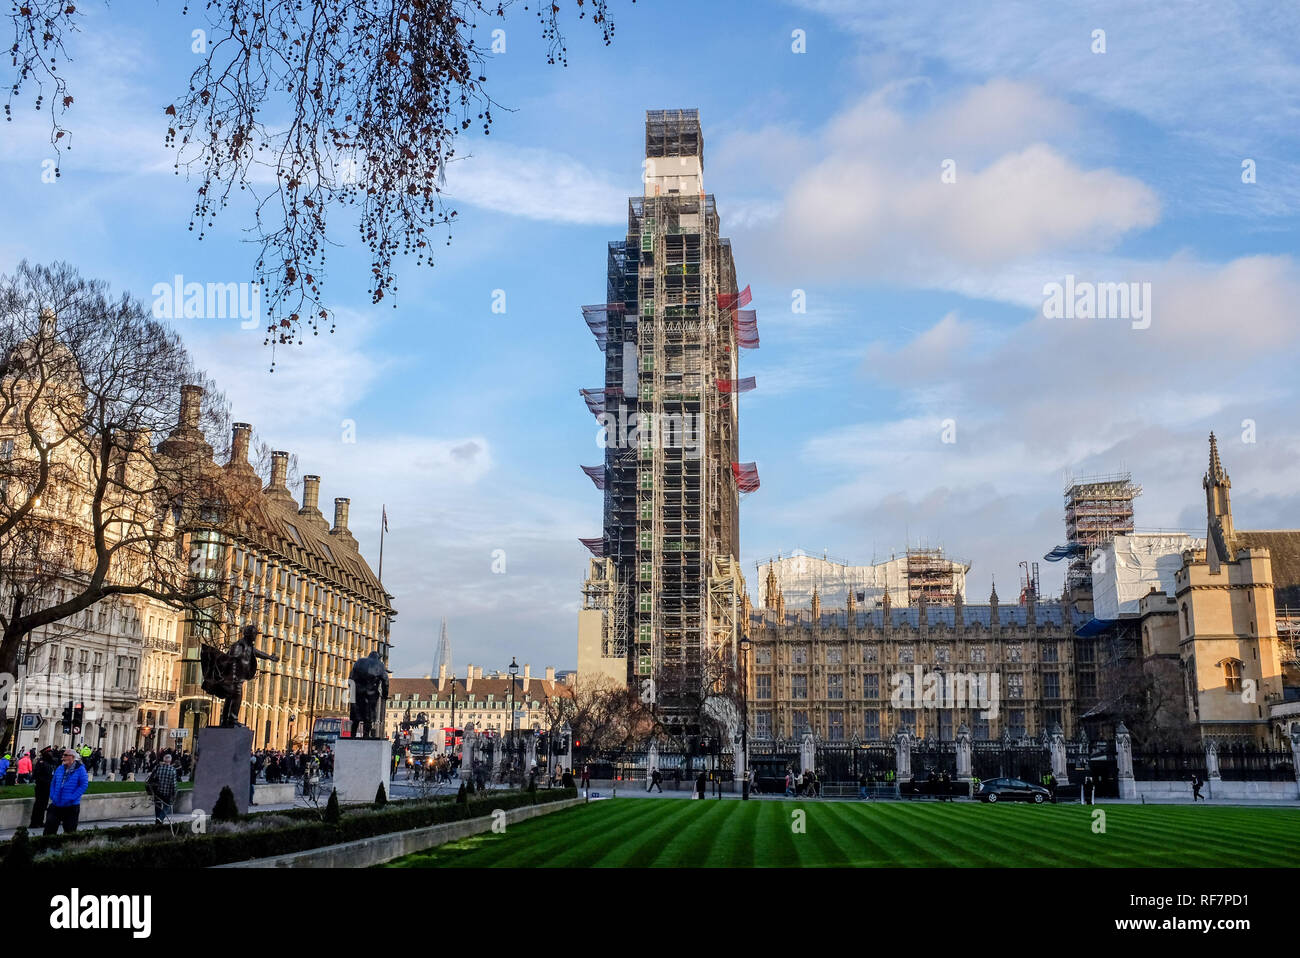 Renovation work being carried out on the Houses of Parliament and Big Ben clock tower Westminster London UK  Photograph taken by Simon Dack Stock Photo